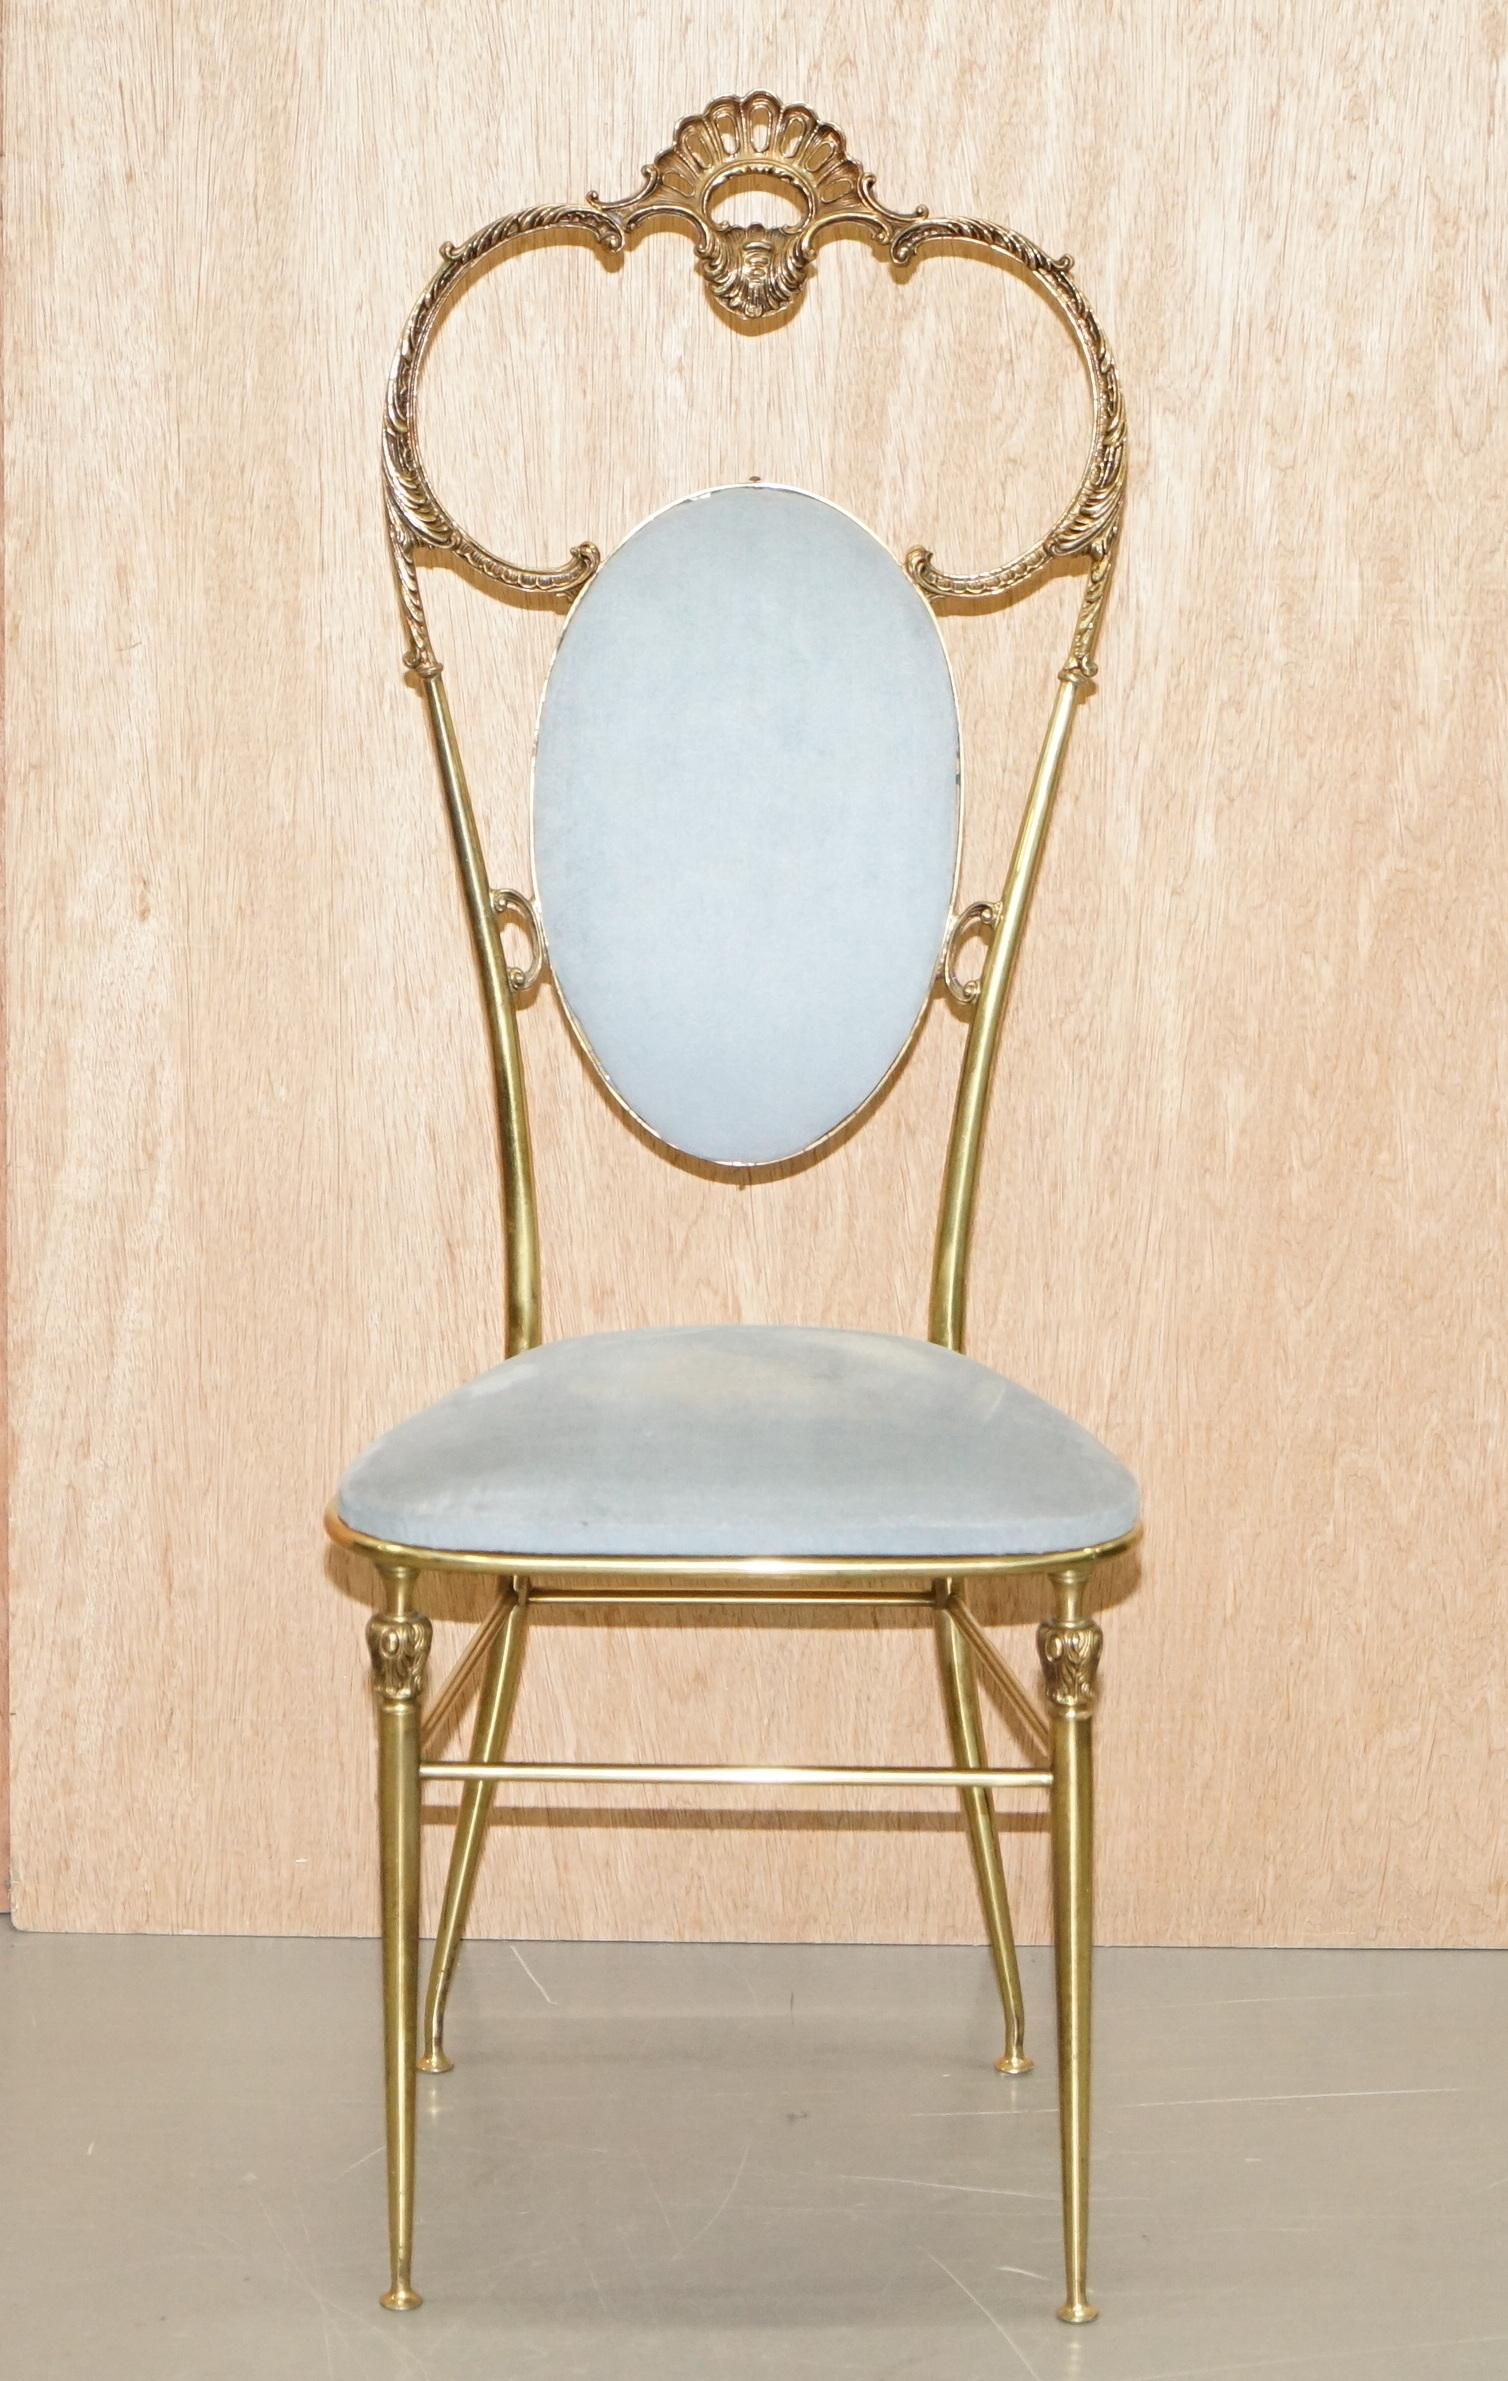 We are delighted to offer for sale this original circa 1930s Chiavari Hollywood Regency chair.

A very well made original piece, the chair is solid brass and one of the nicest castings I have ever seen. This is also a lot taller than other chairs